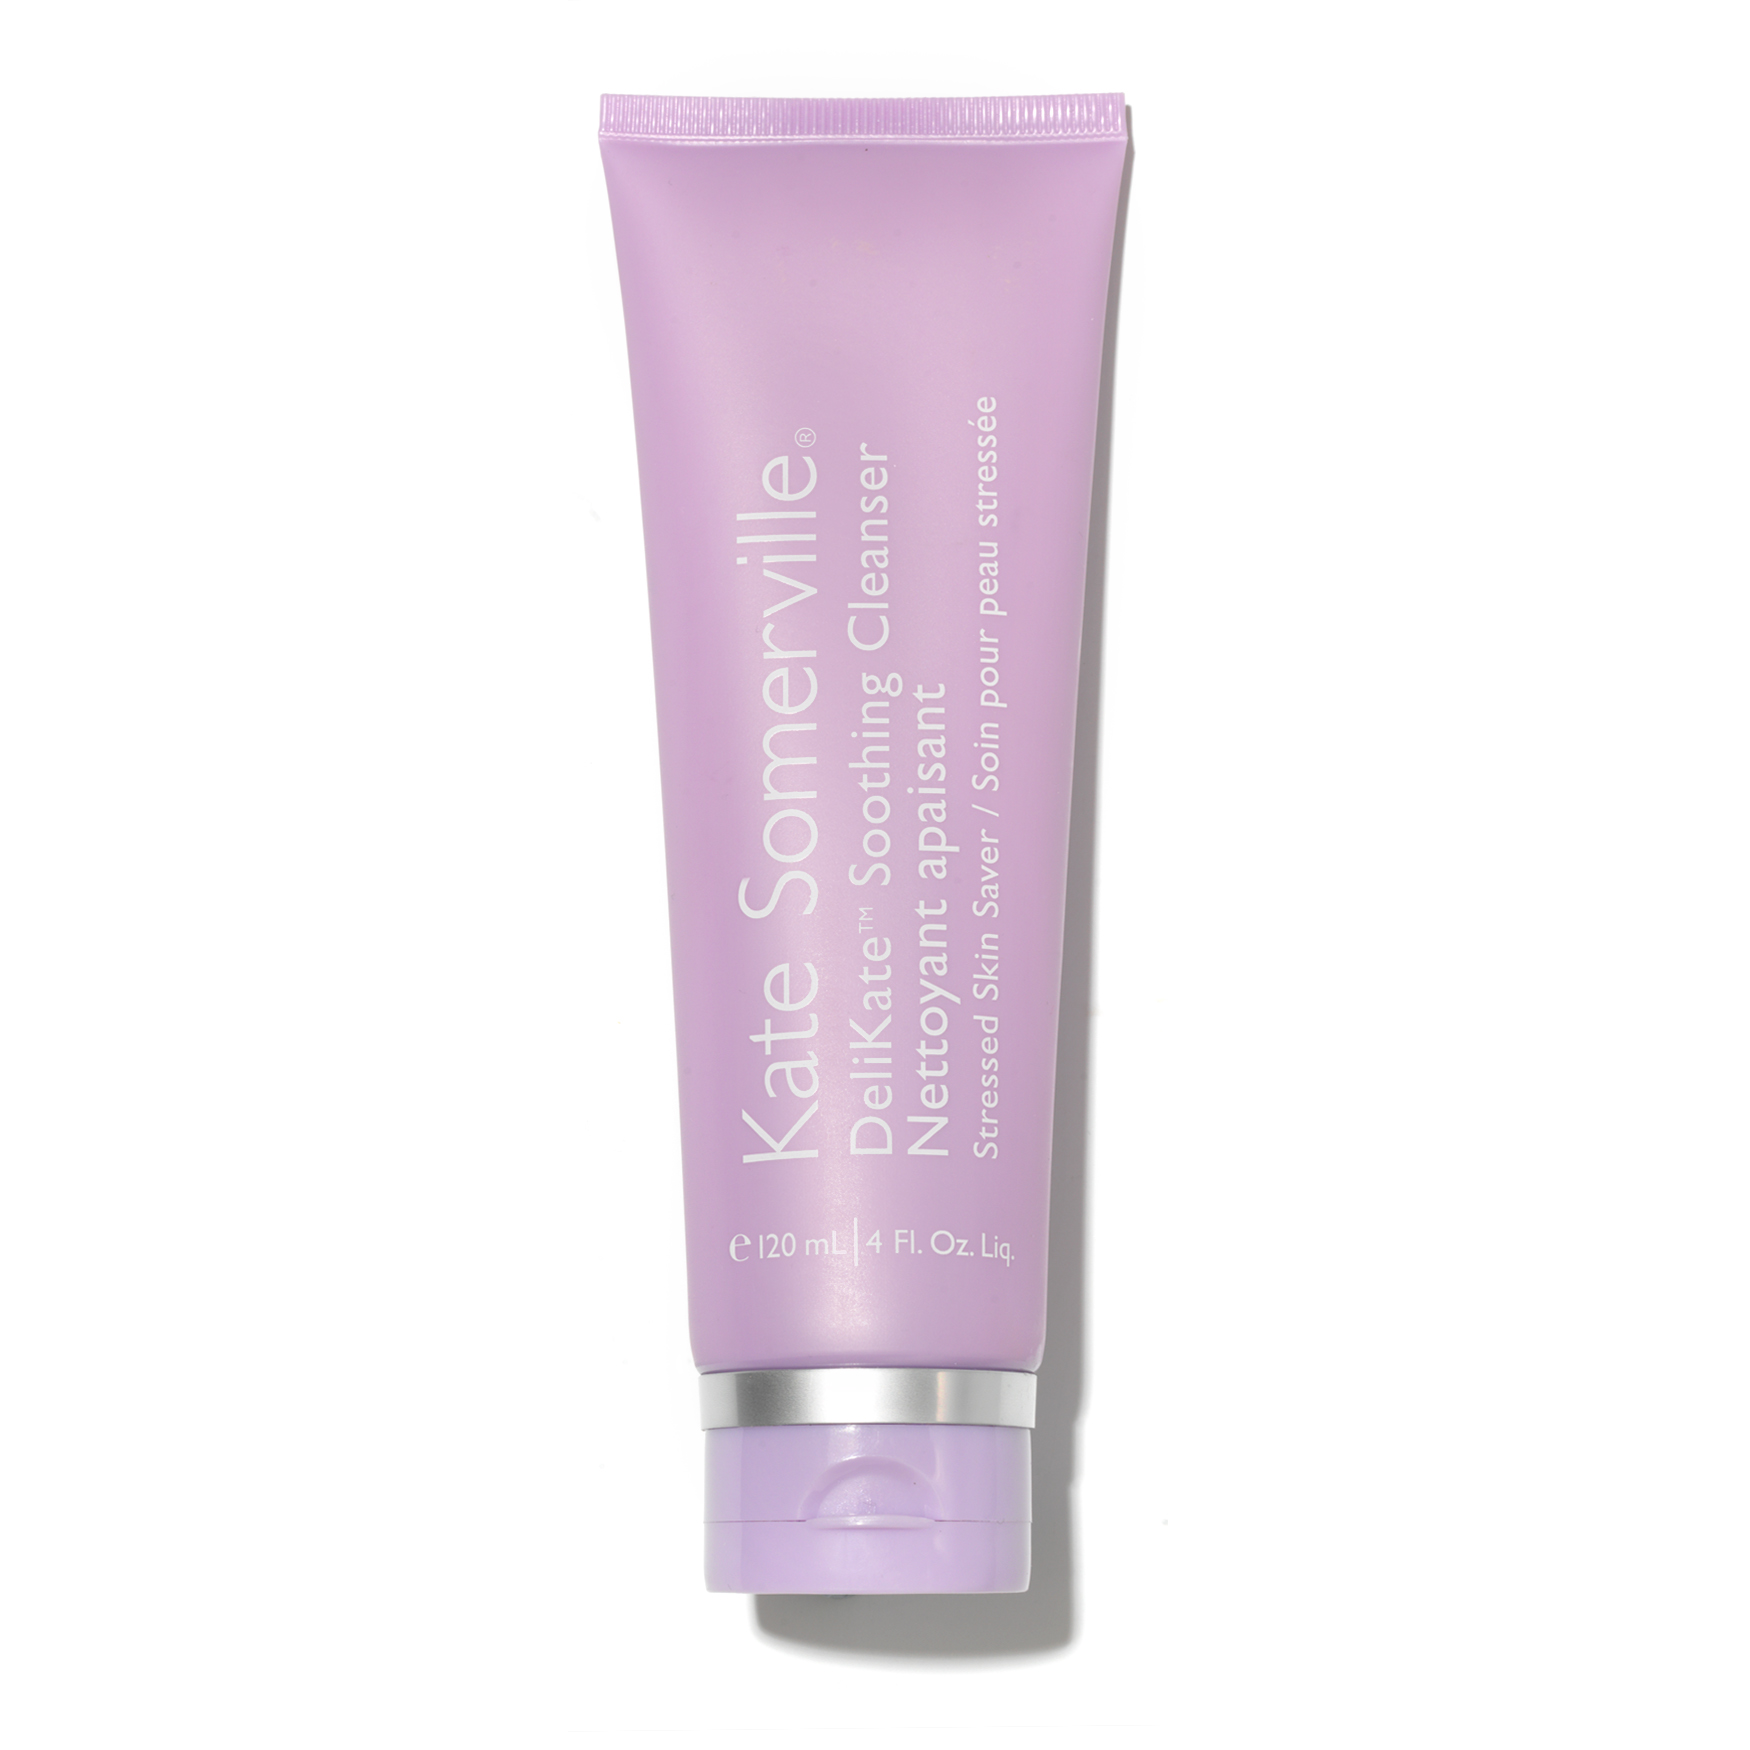 Kate Somerville DeliKate Soothing Cleanser | Space NK